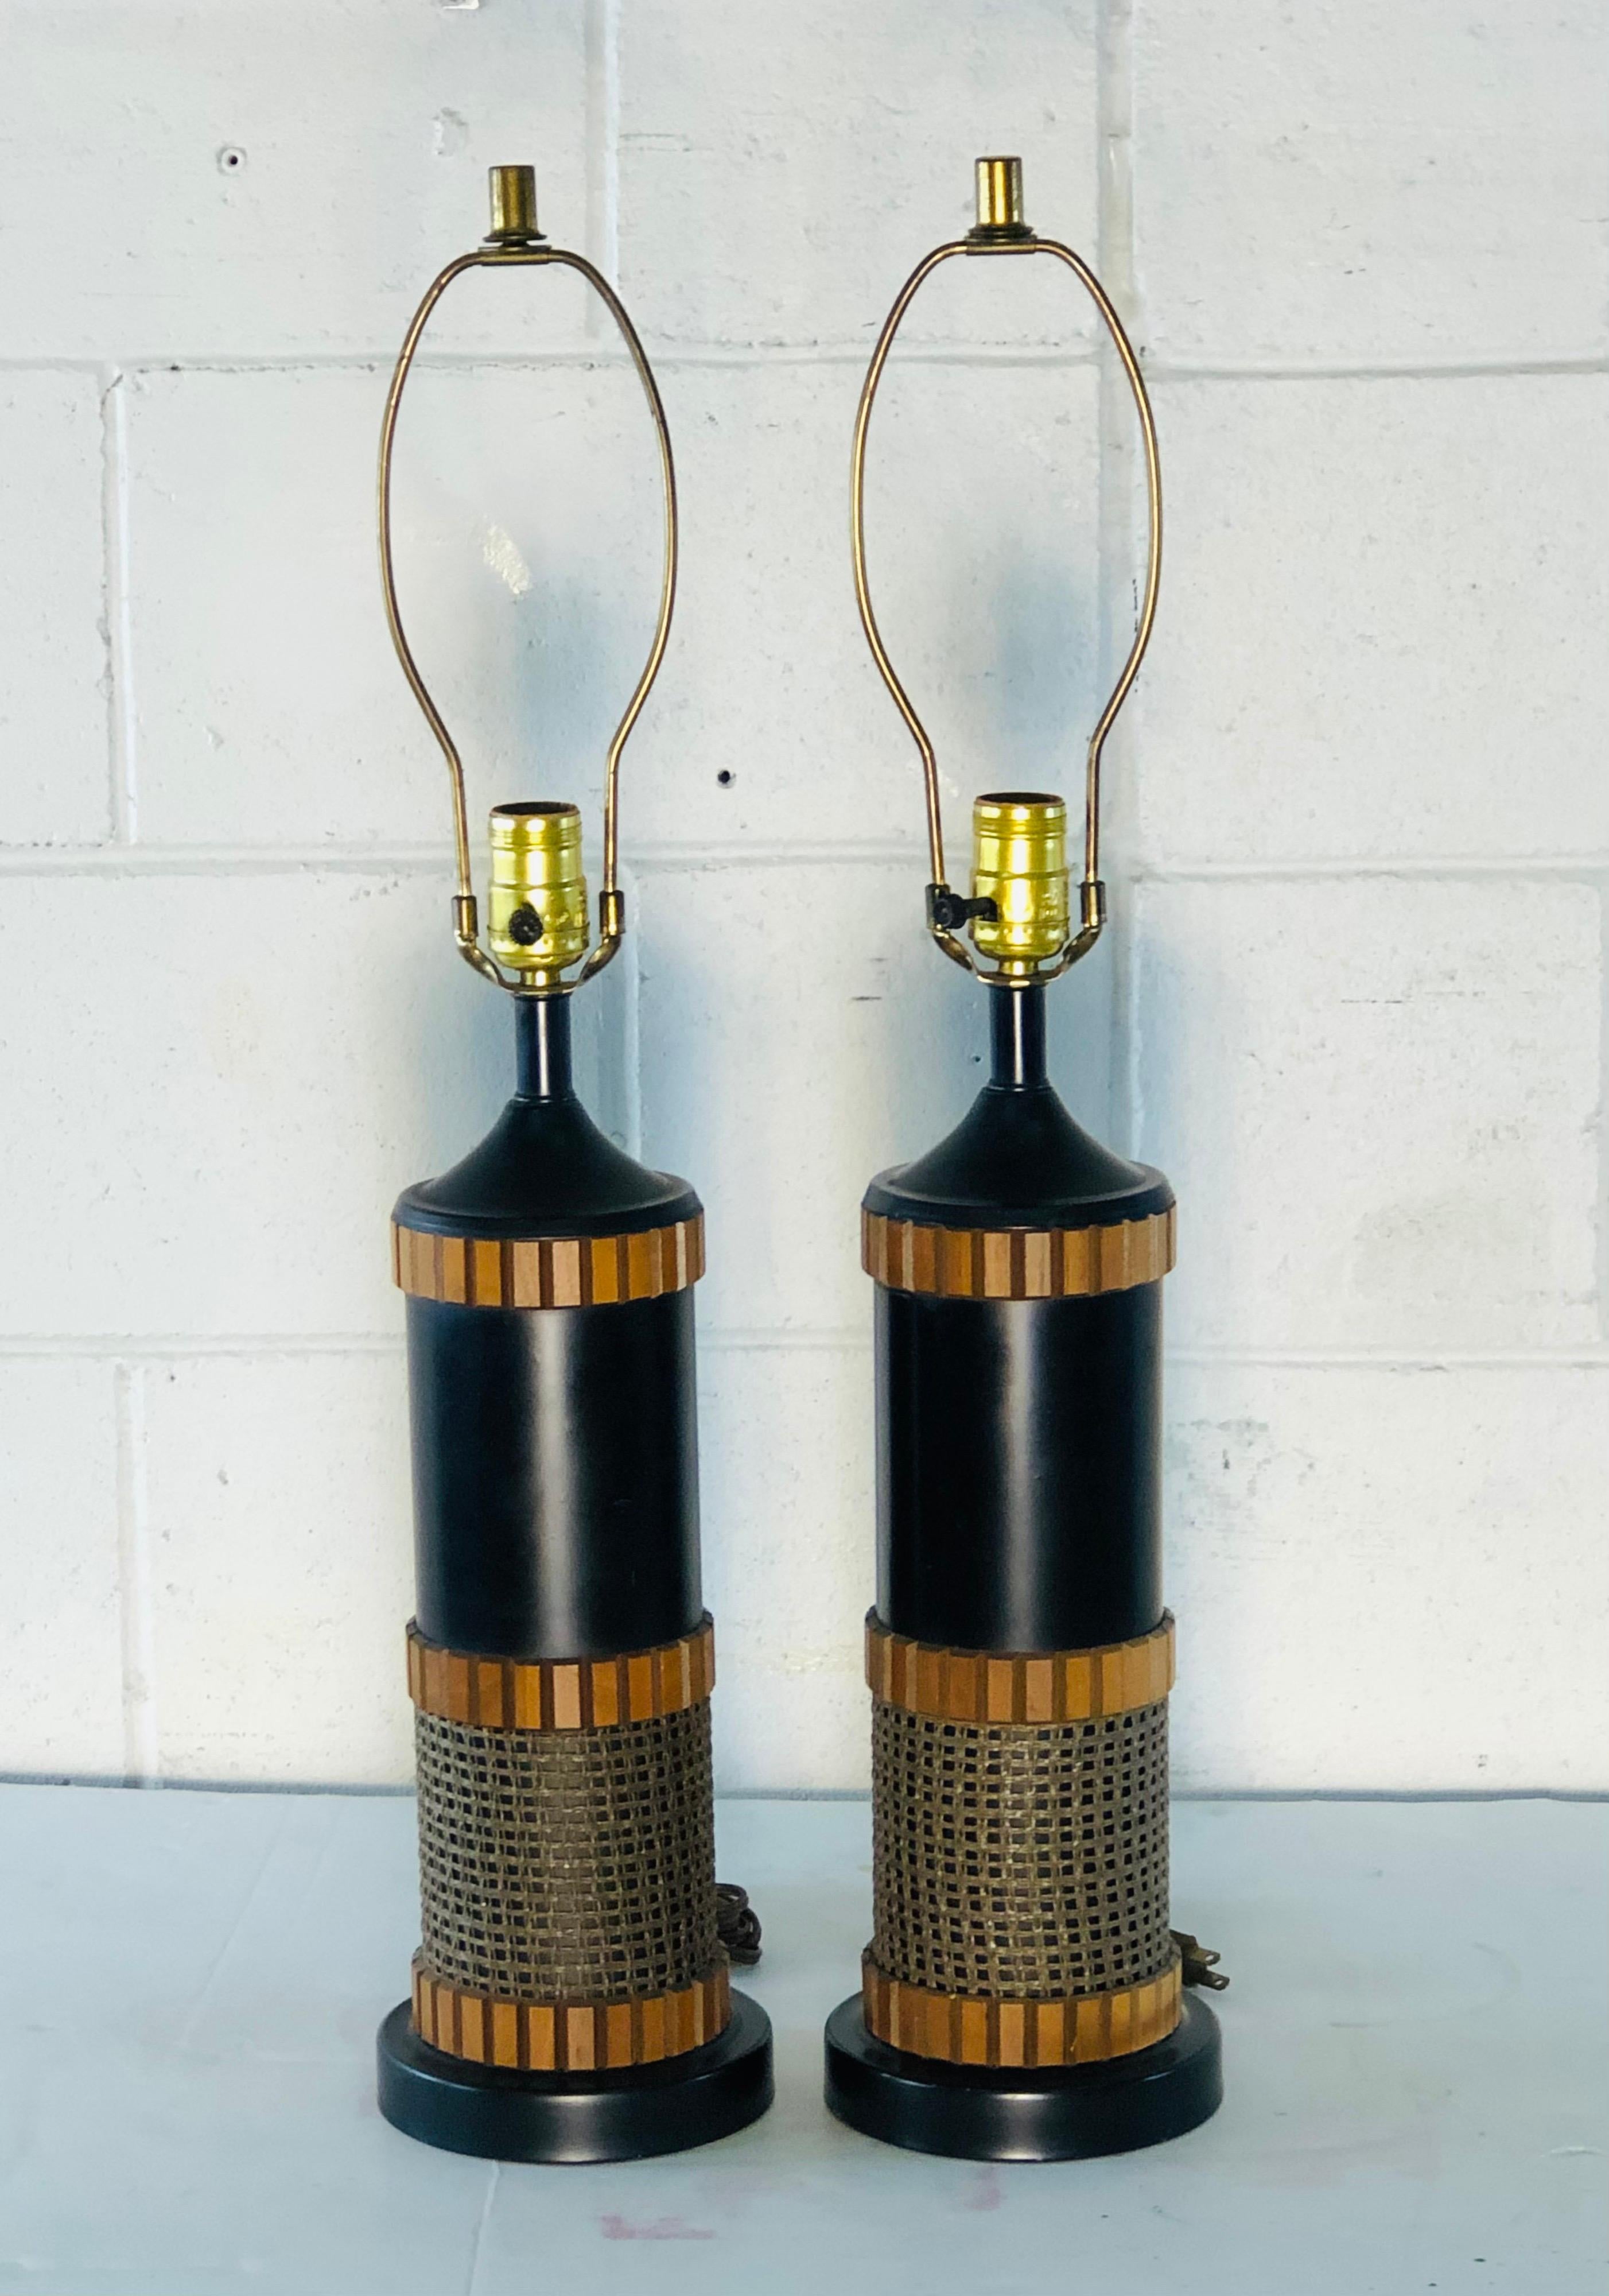 Vintage 1960s pair of wood and burlap style table lamps. The lamps are wired for the US and in working condition. Socket, Measures: 18.5” height harp, 4” diameter x 9” height. Excellent condition. Shades are not included.